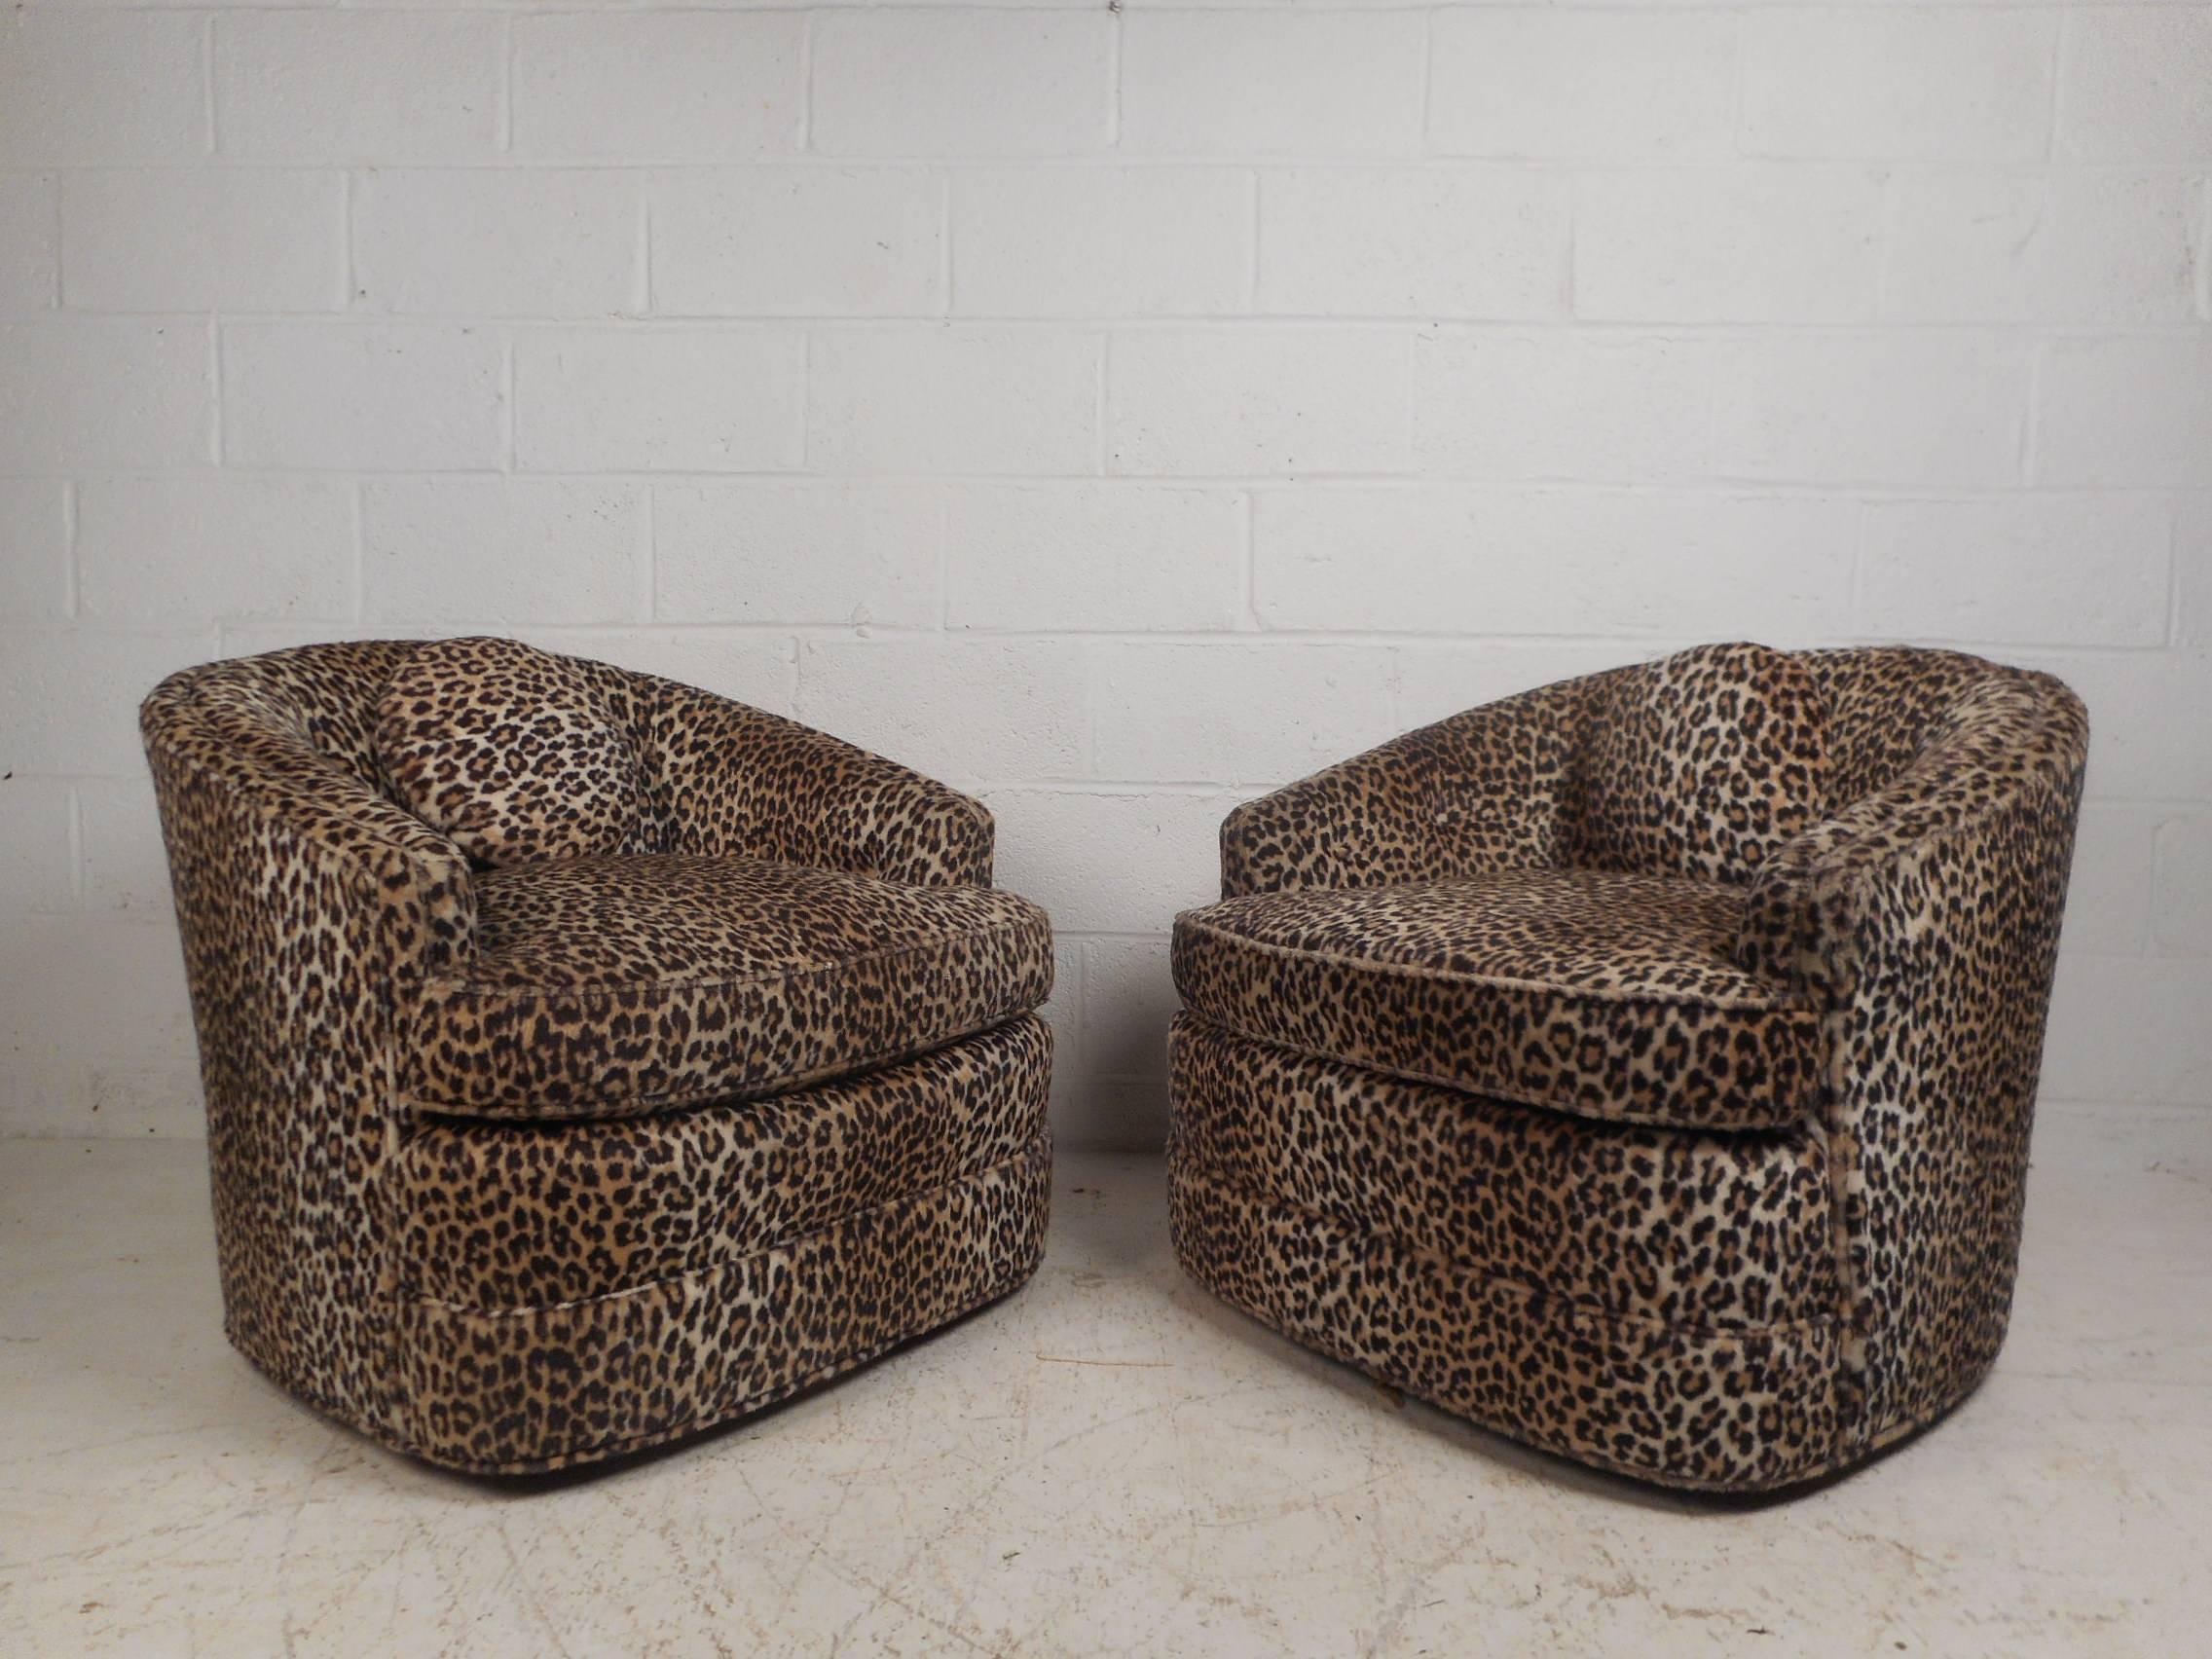 This stunning pair of vintage Henredon Shoonbeck lounge chairs feature extremely soft leopard upholstery and removable cushions. The low sitting swivel design with angled arm rests provides maximum comfort in any seating arrangement. This stylish